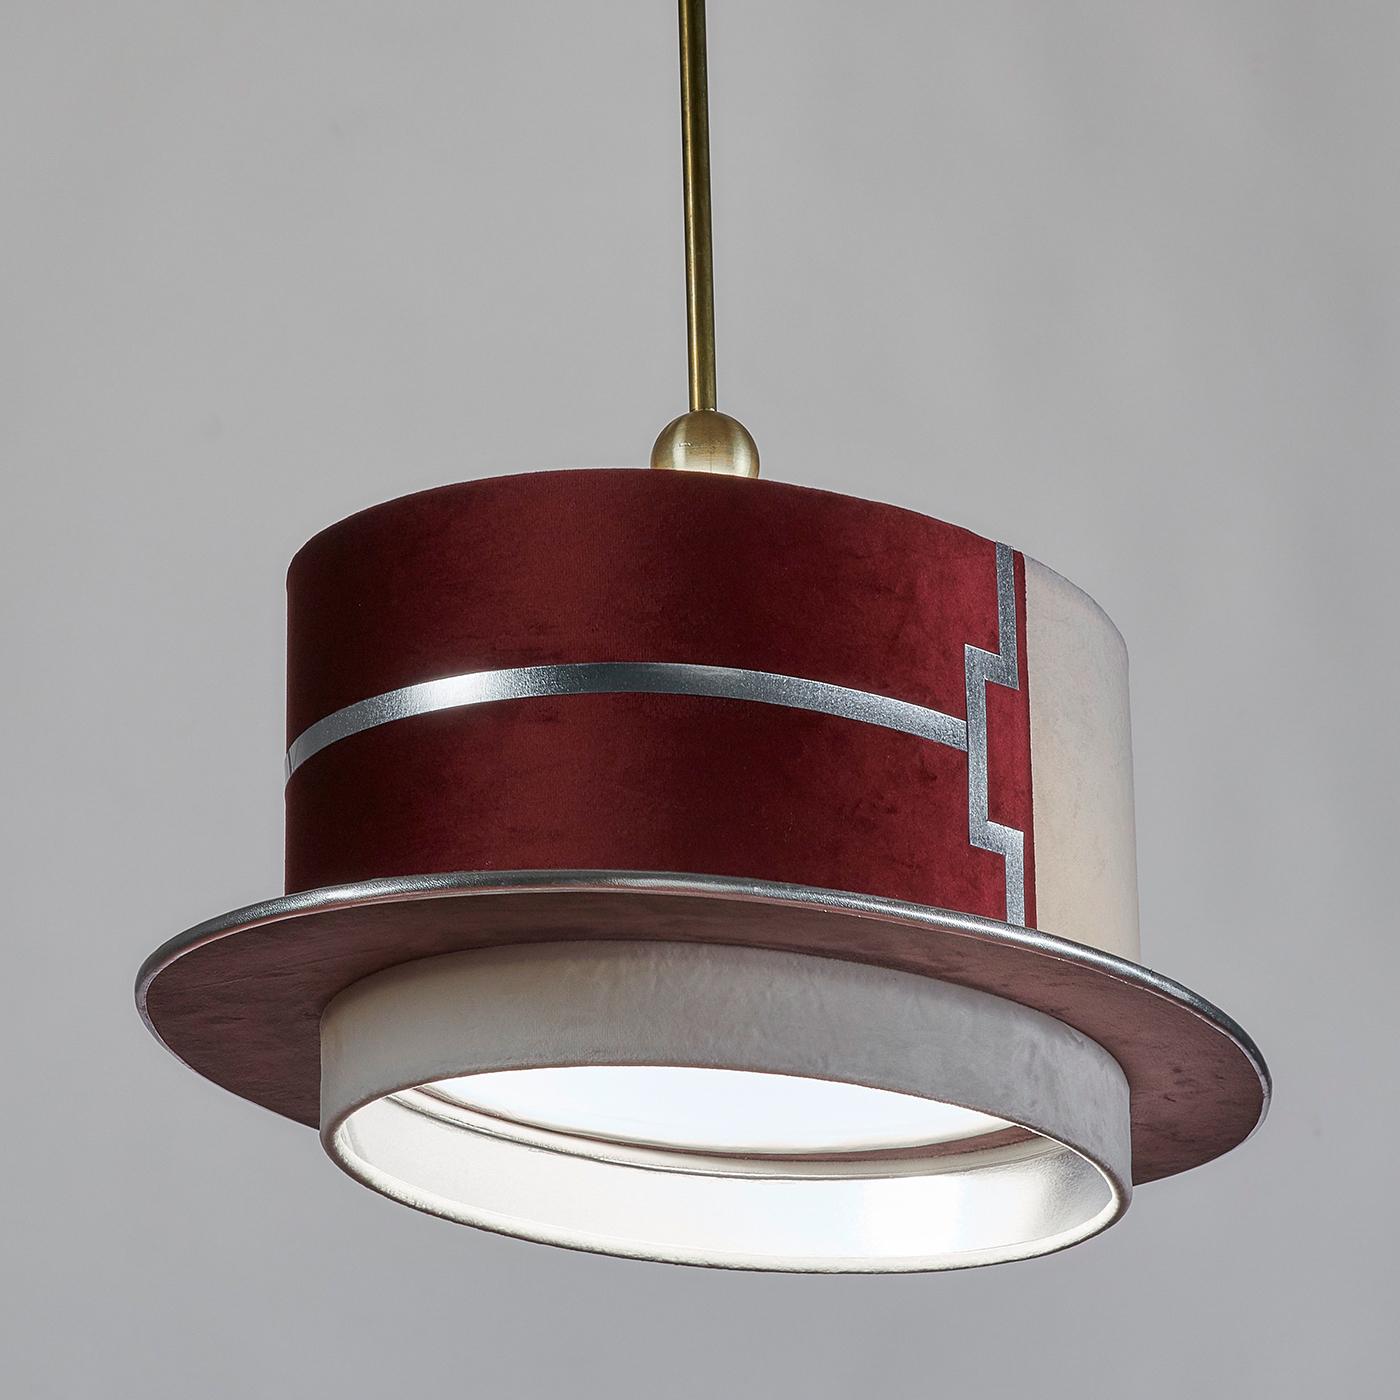 The shape of this pendant lamp is inspired by the hats of the Venetian gondoliers. Handcrafted entirely of ivory and magenta velvet with ivory and silver leather trims, this elegant pendant light features a geometric decoration in silver laminate.